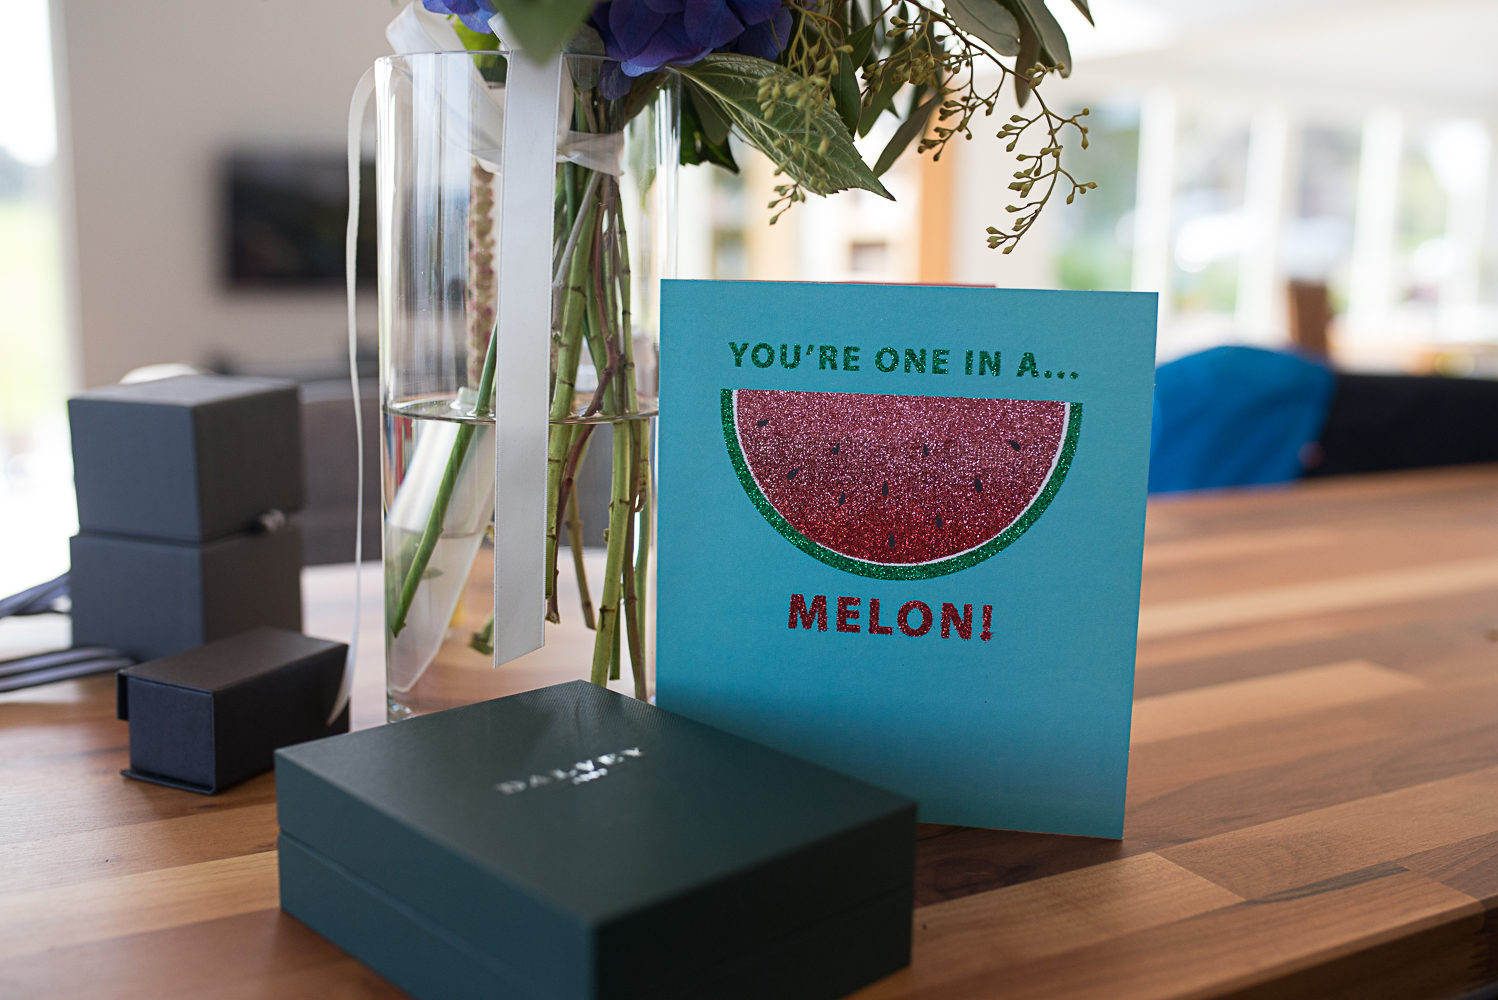  you are one in a melon, wedding details, Scottish wedding 